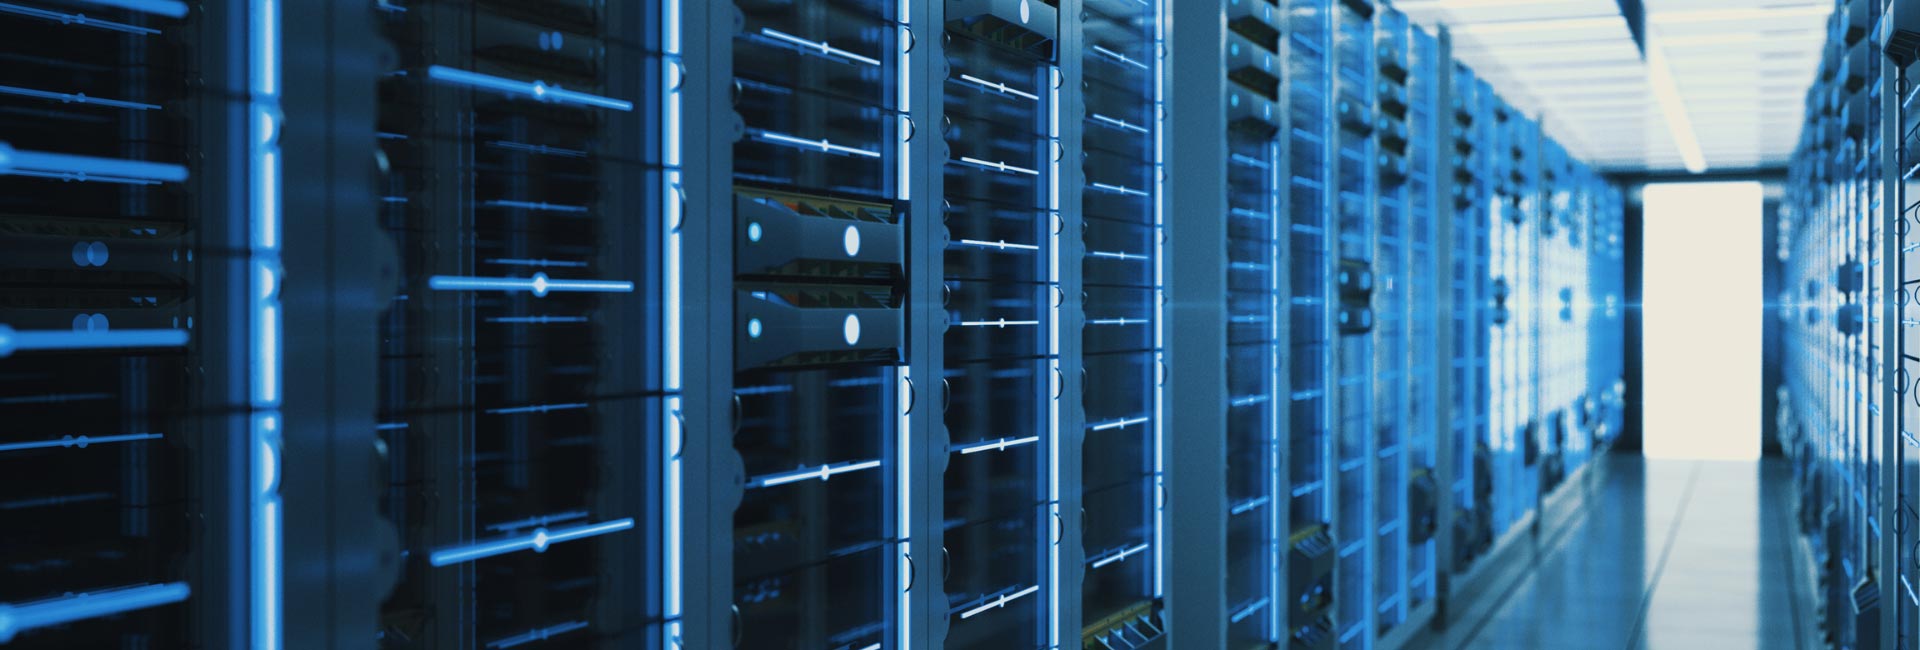 10 Benefits of Server Virtualization For Businesses